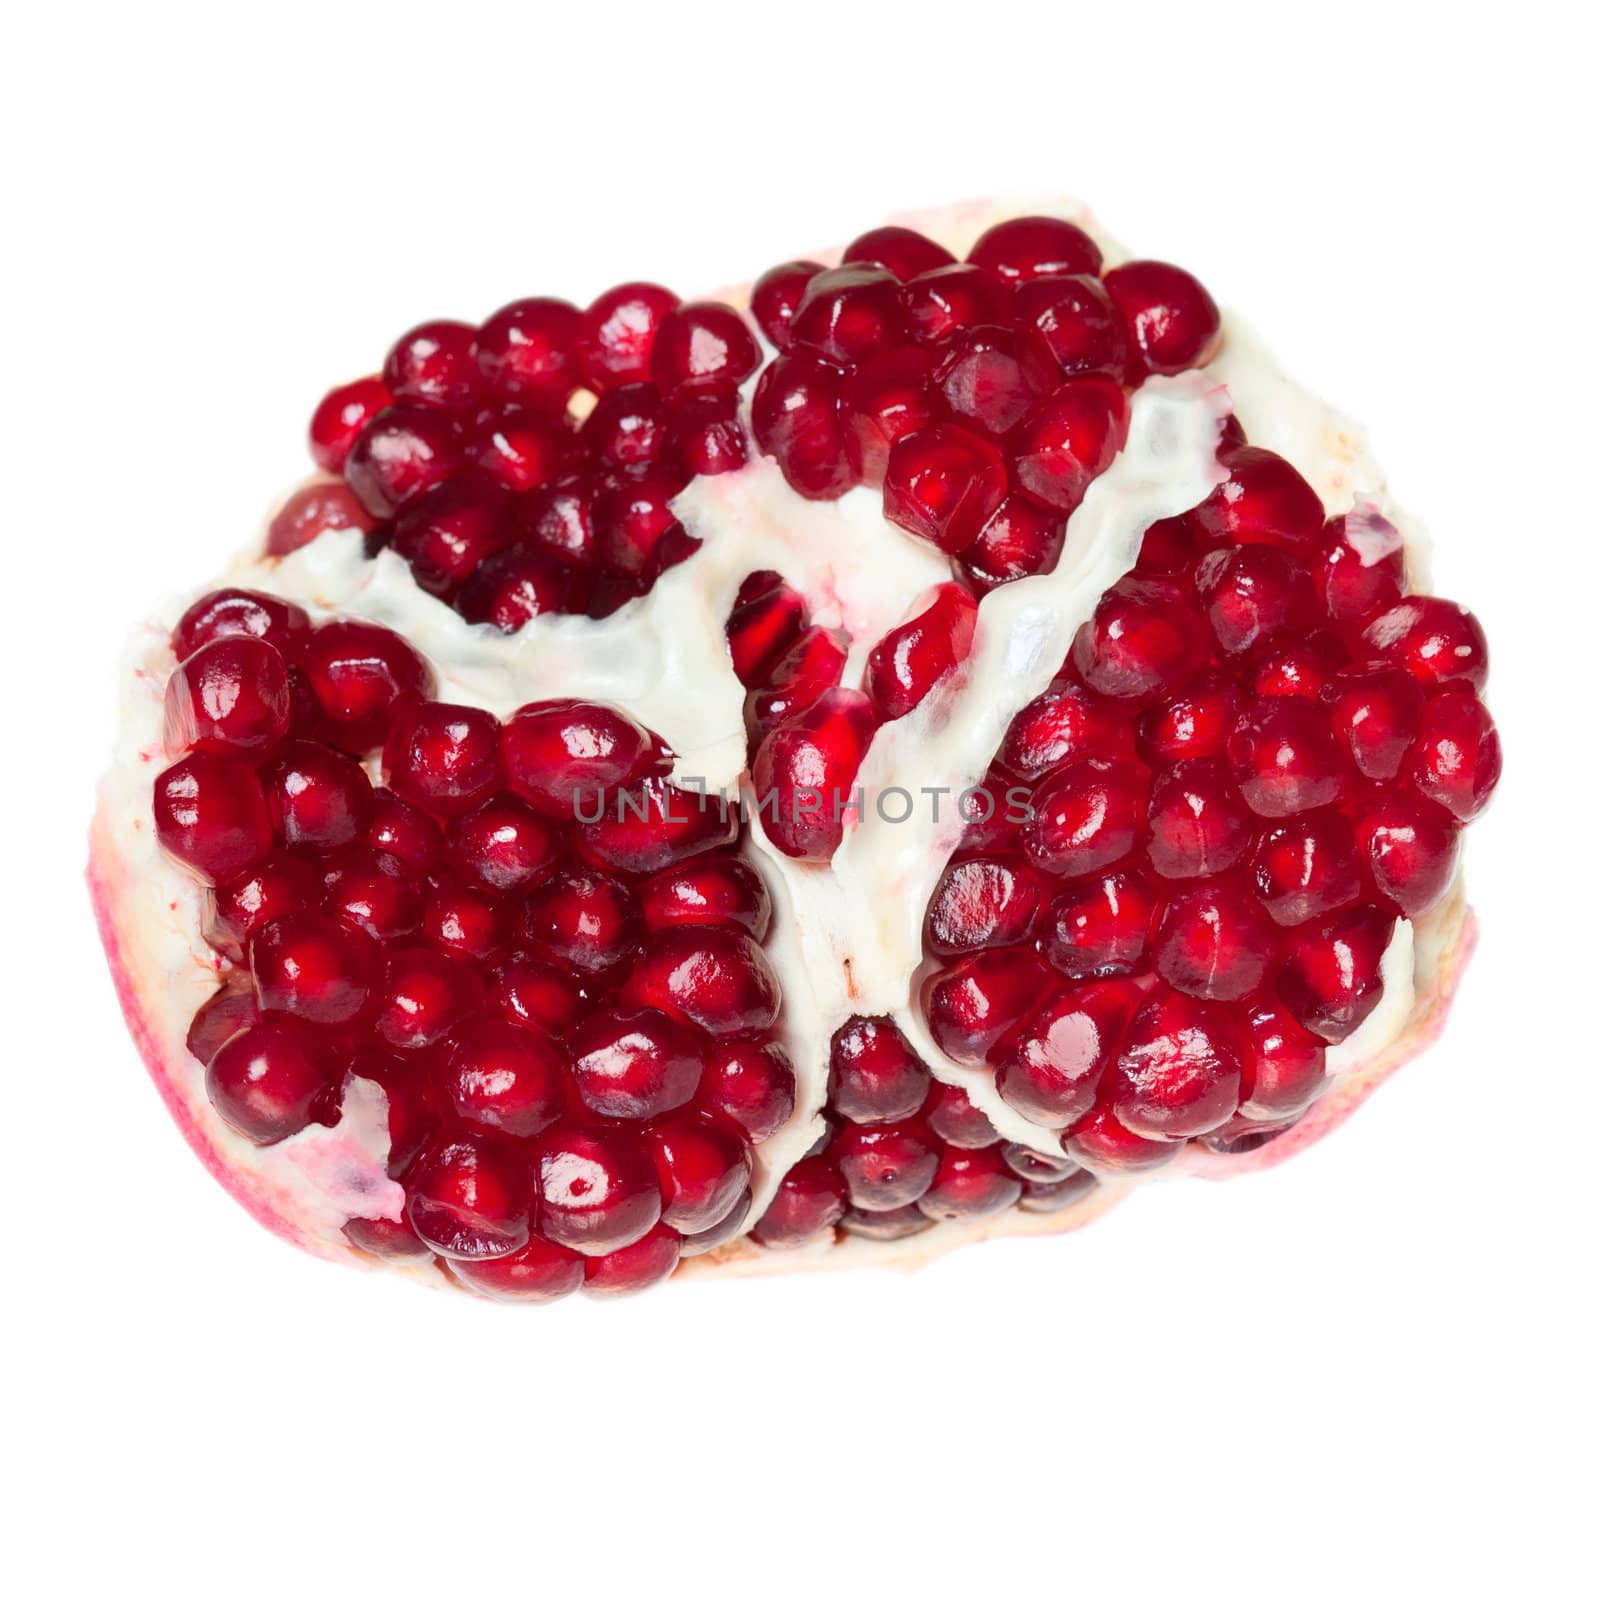 Juicy pomegranate grains isolated white background with clipping path